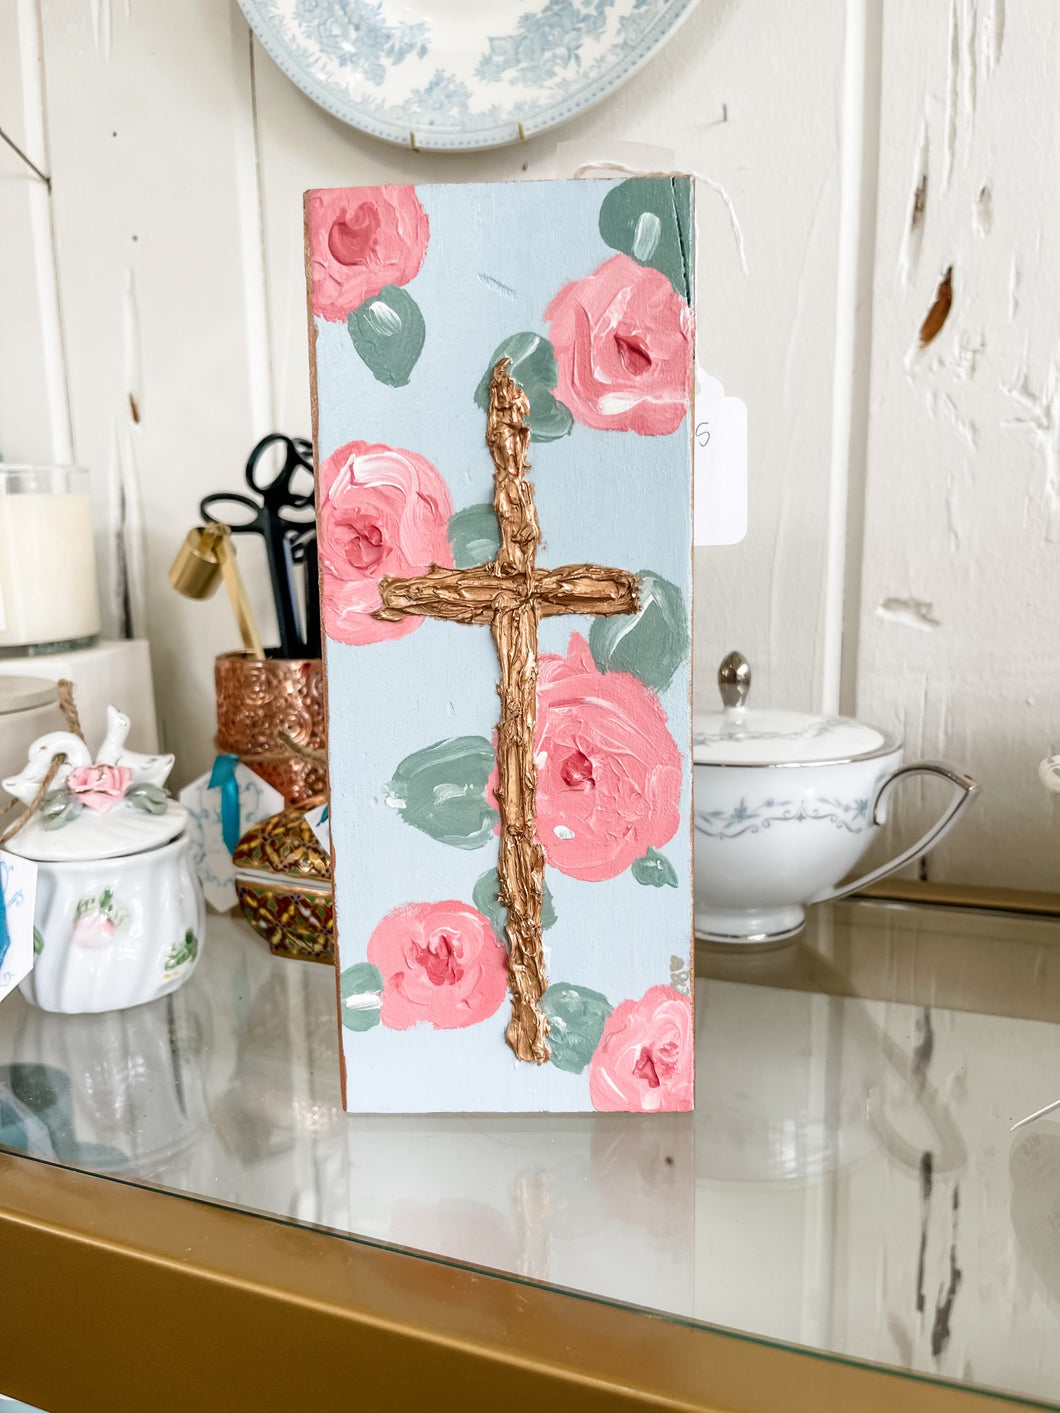 9x3.5 Blush Floral Hand Painted Wood Decor with Gold Texture Cross-Stretched Out Designs By Chelse Breaux